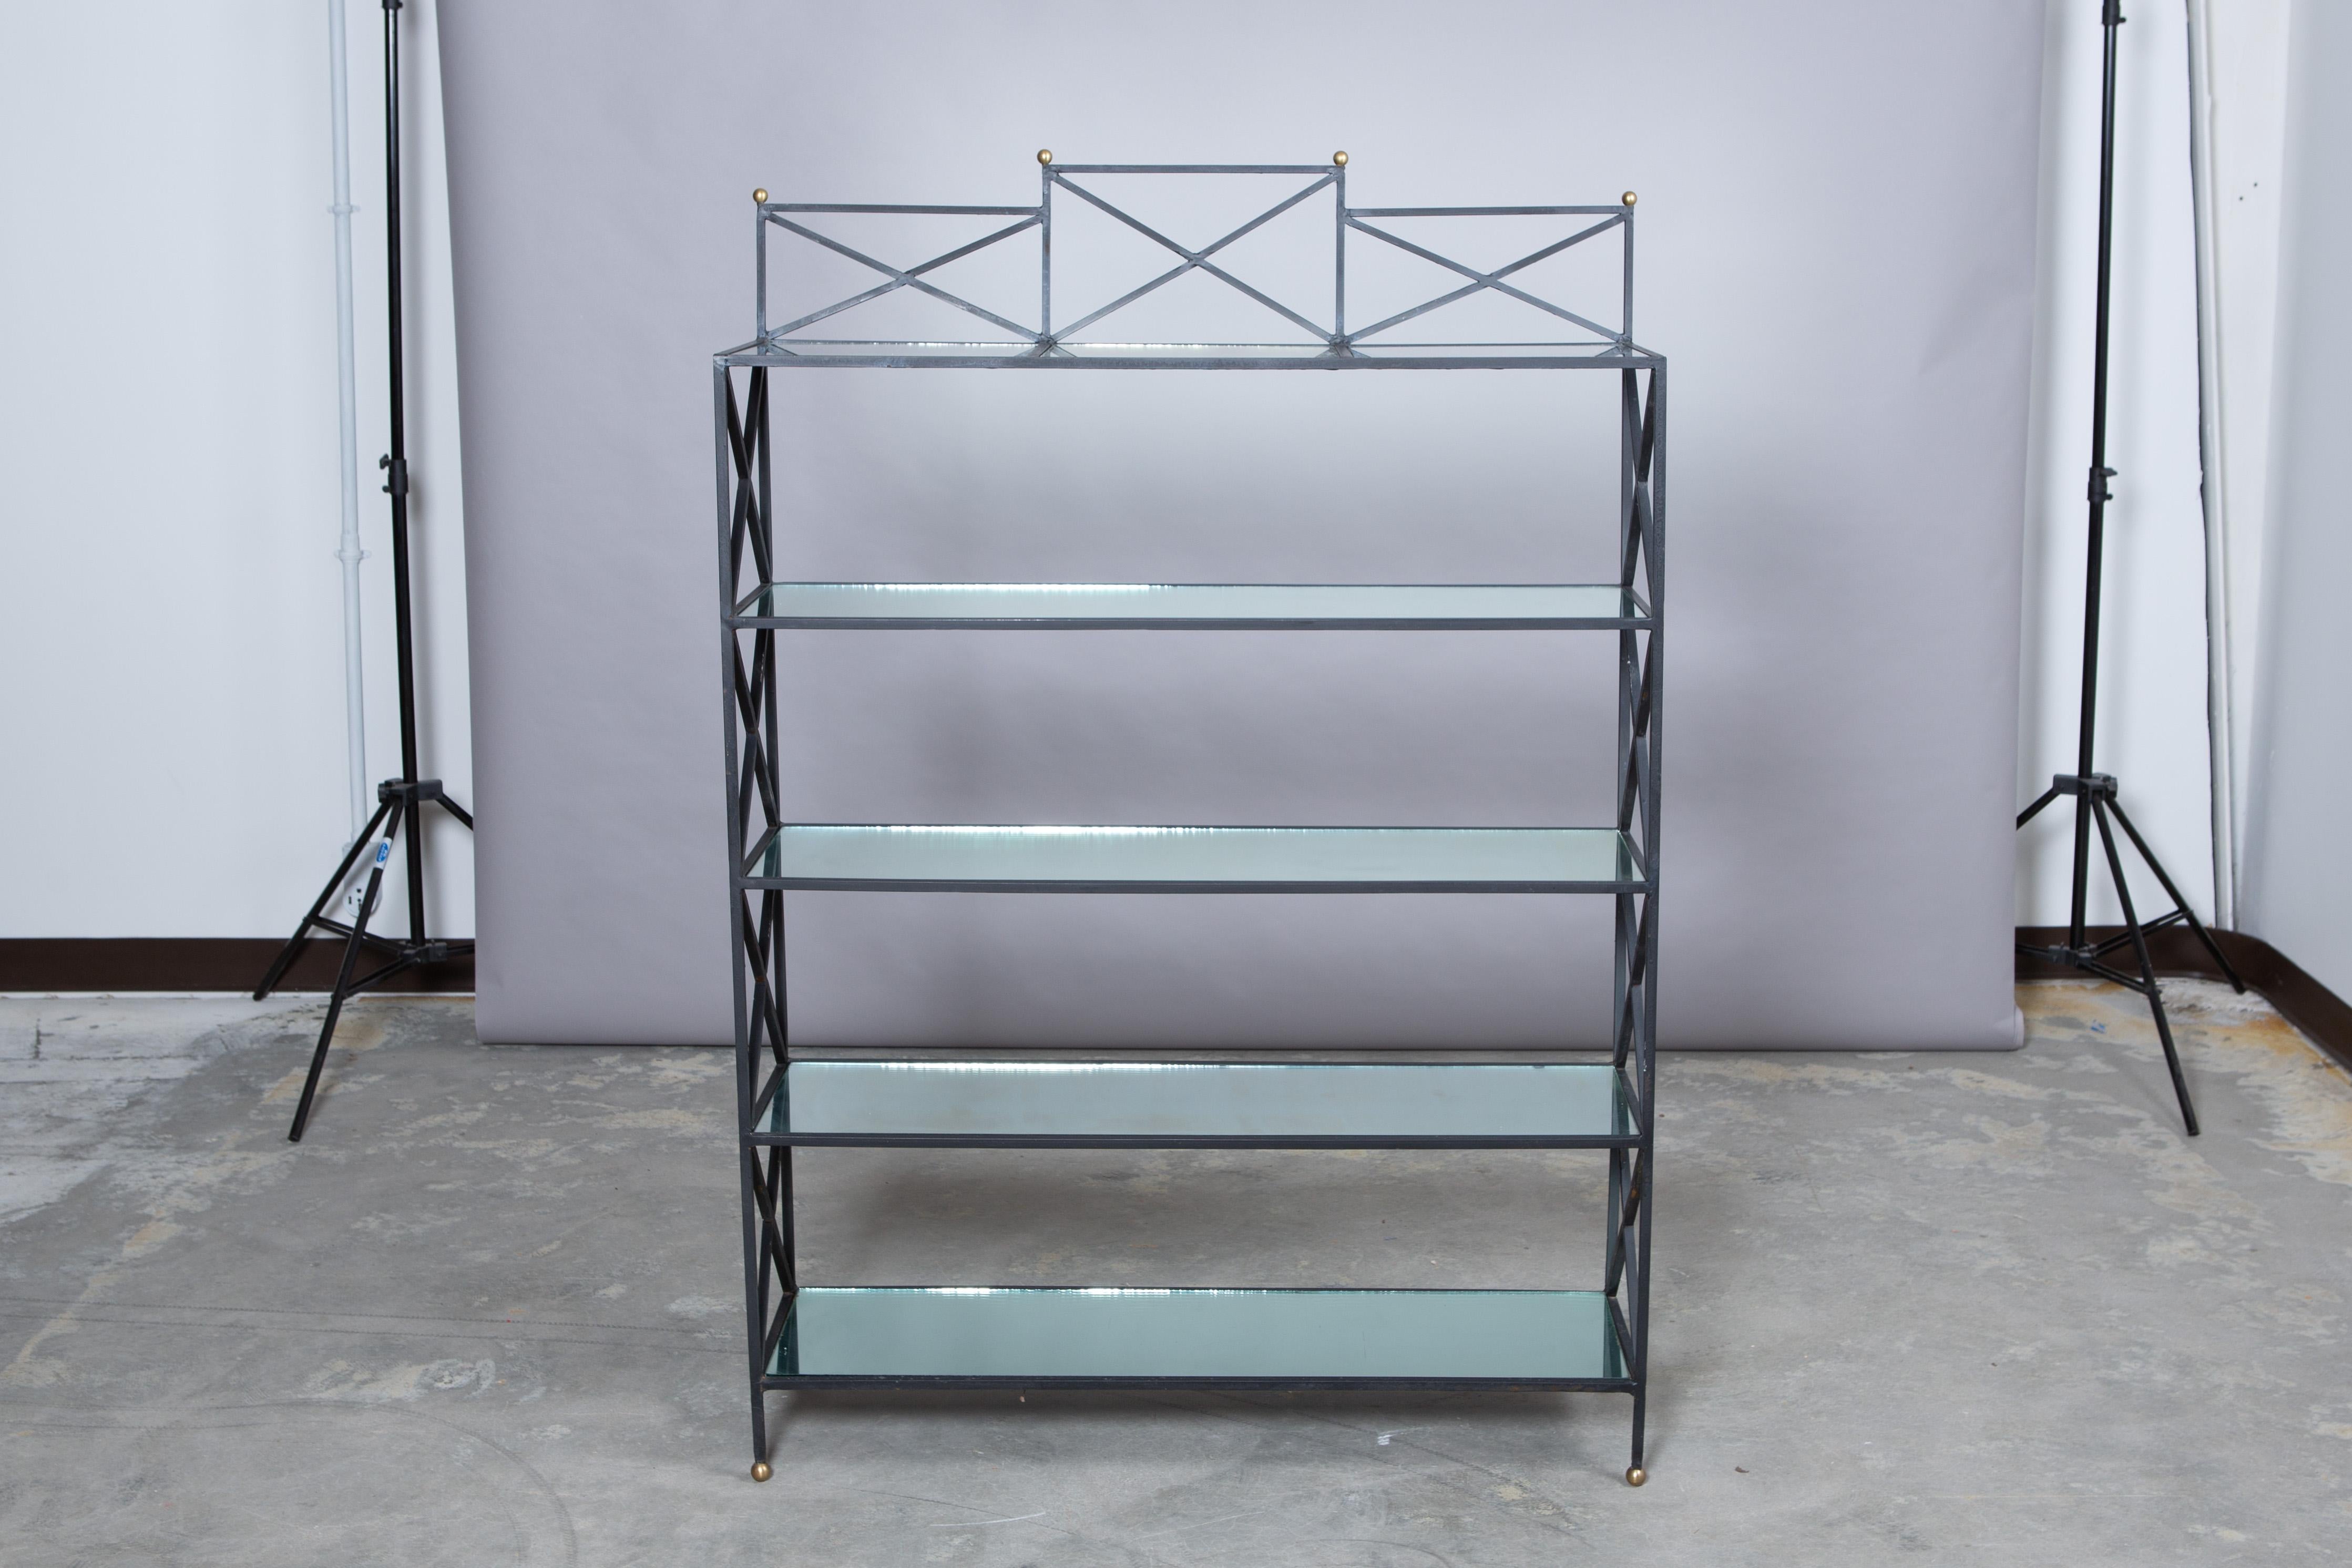 1950s French iron neoclassical style etagere with five mirror shelves, gold ball feet and detail. Light age to mirror. Very good condition for age!
Measures: 53